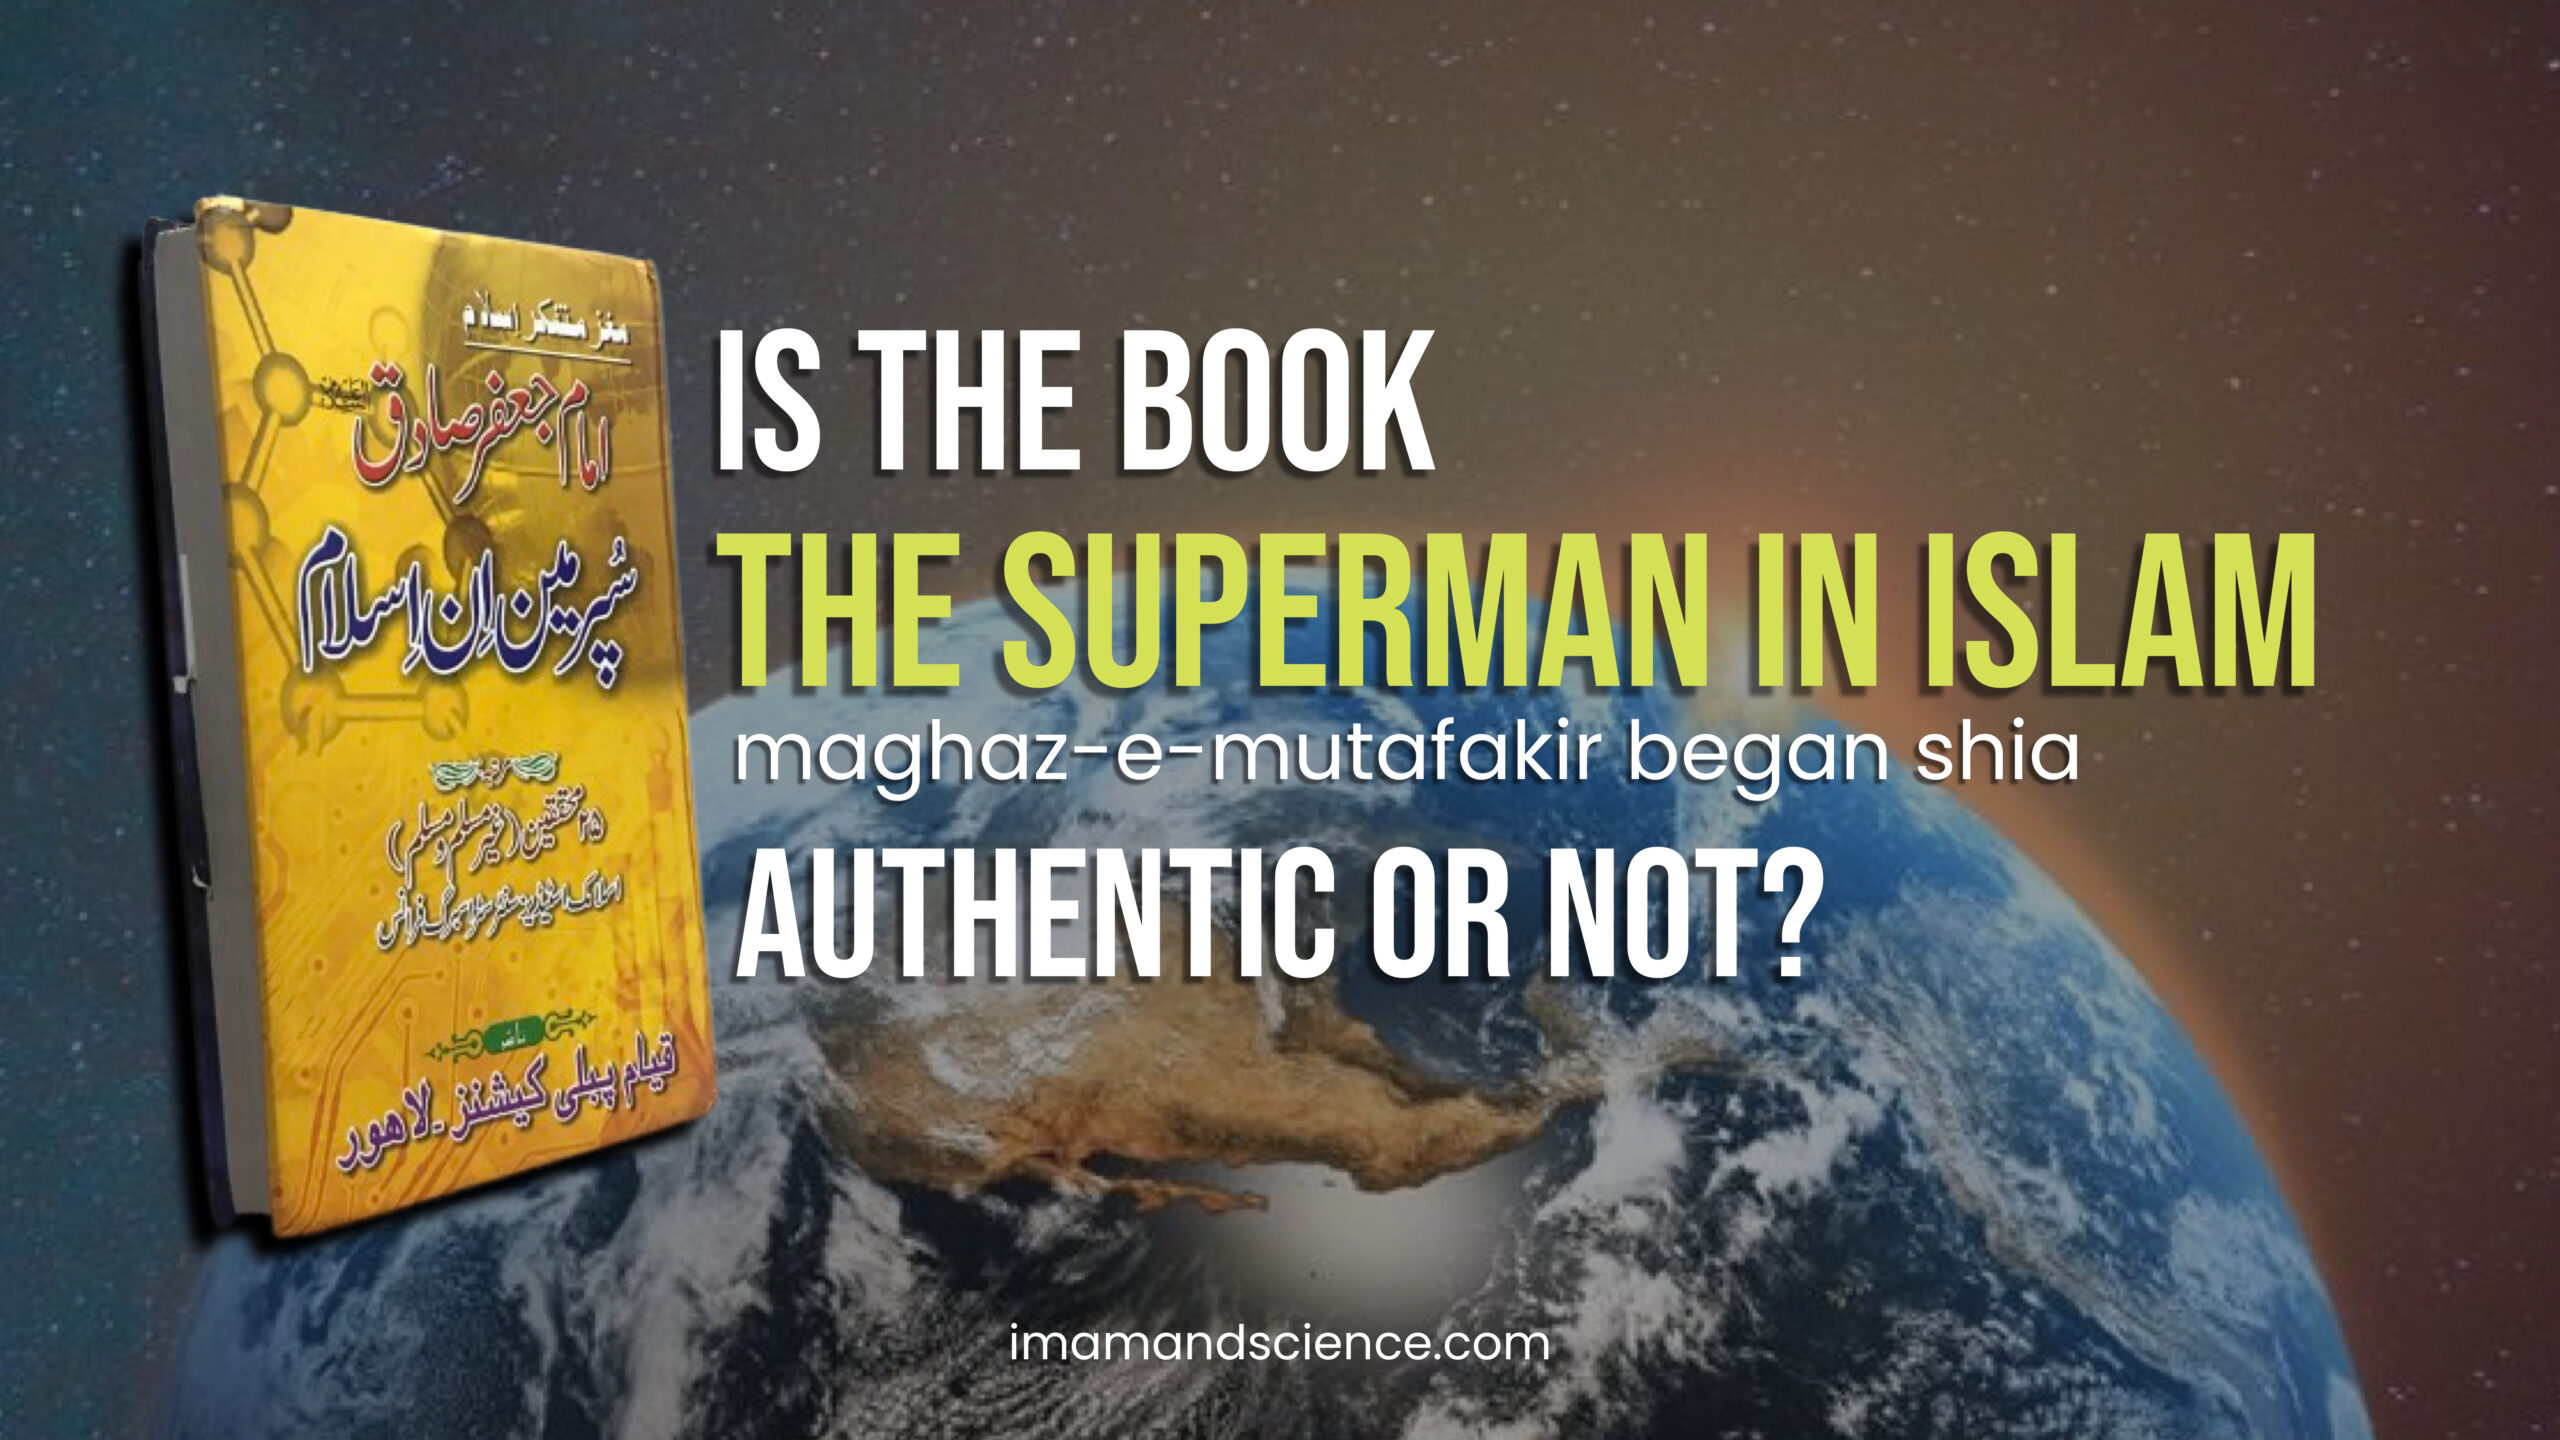 IS THE BOOK “THE SUPERMAN IN ISLAM” AUTHENTIC OR NOT?